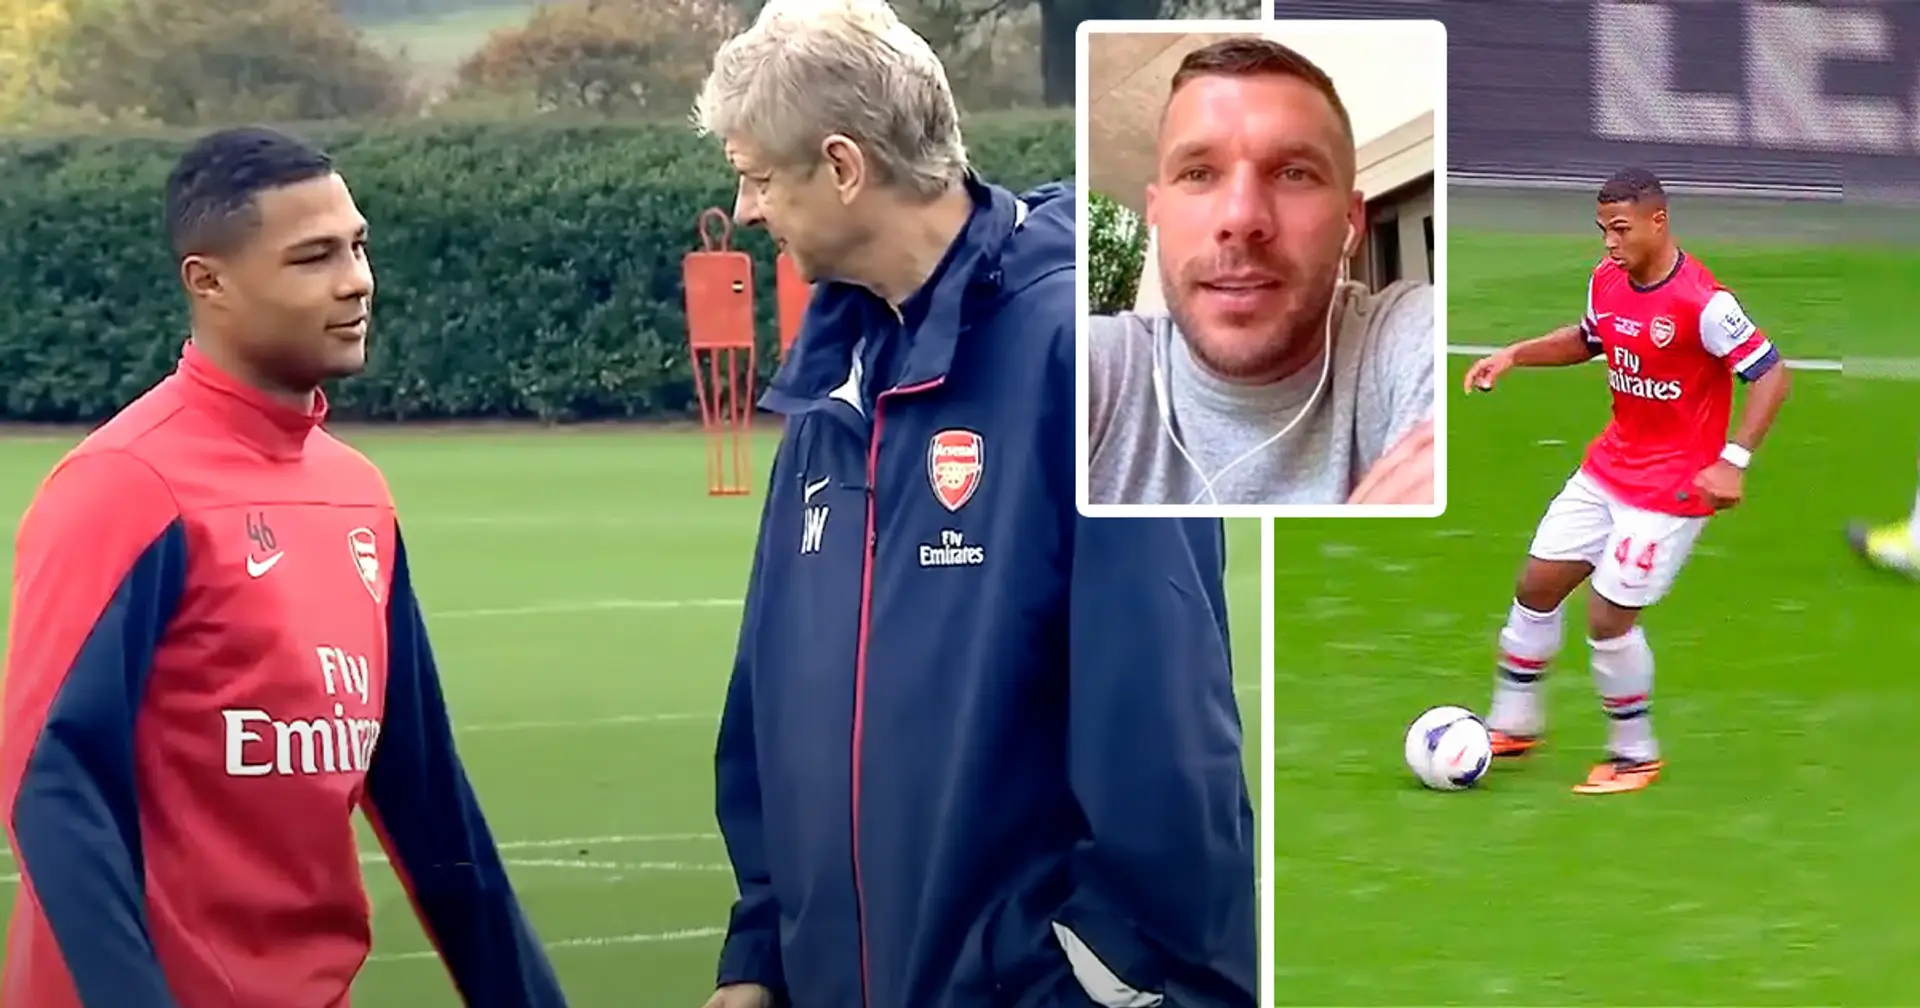 'He was unlucky': Lukas Podolski explained why Gnabry failed at Arsenal